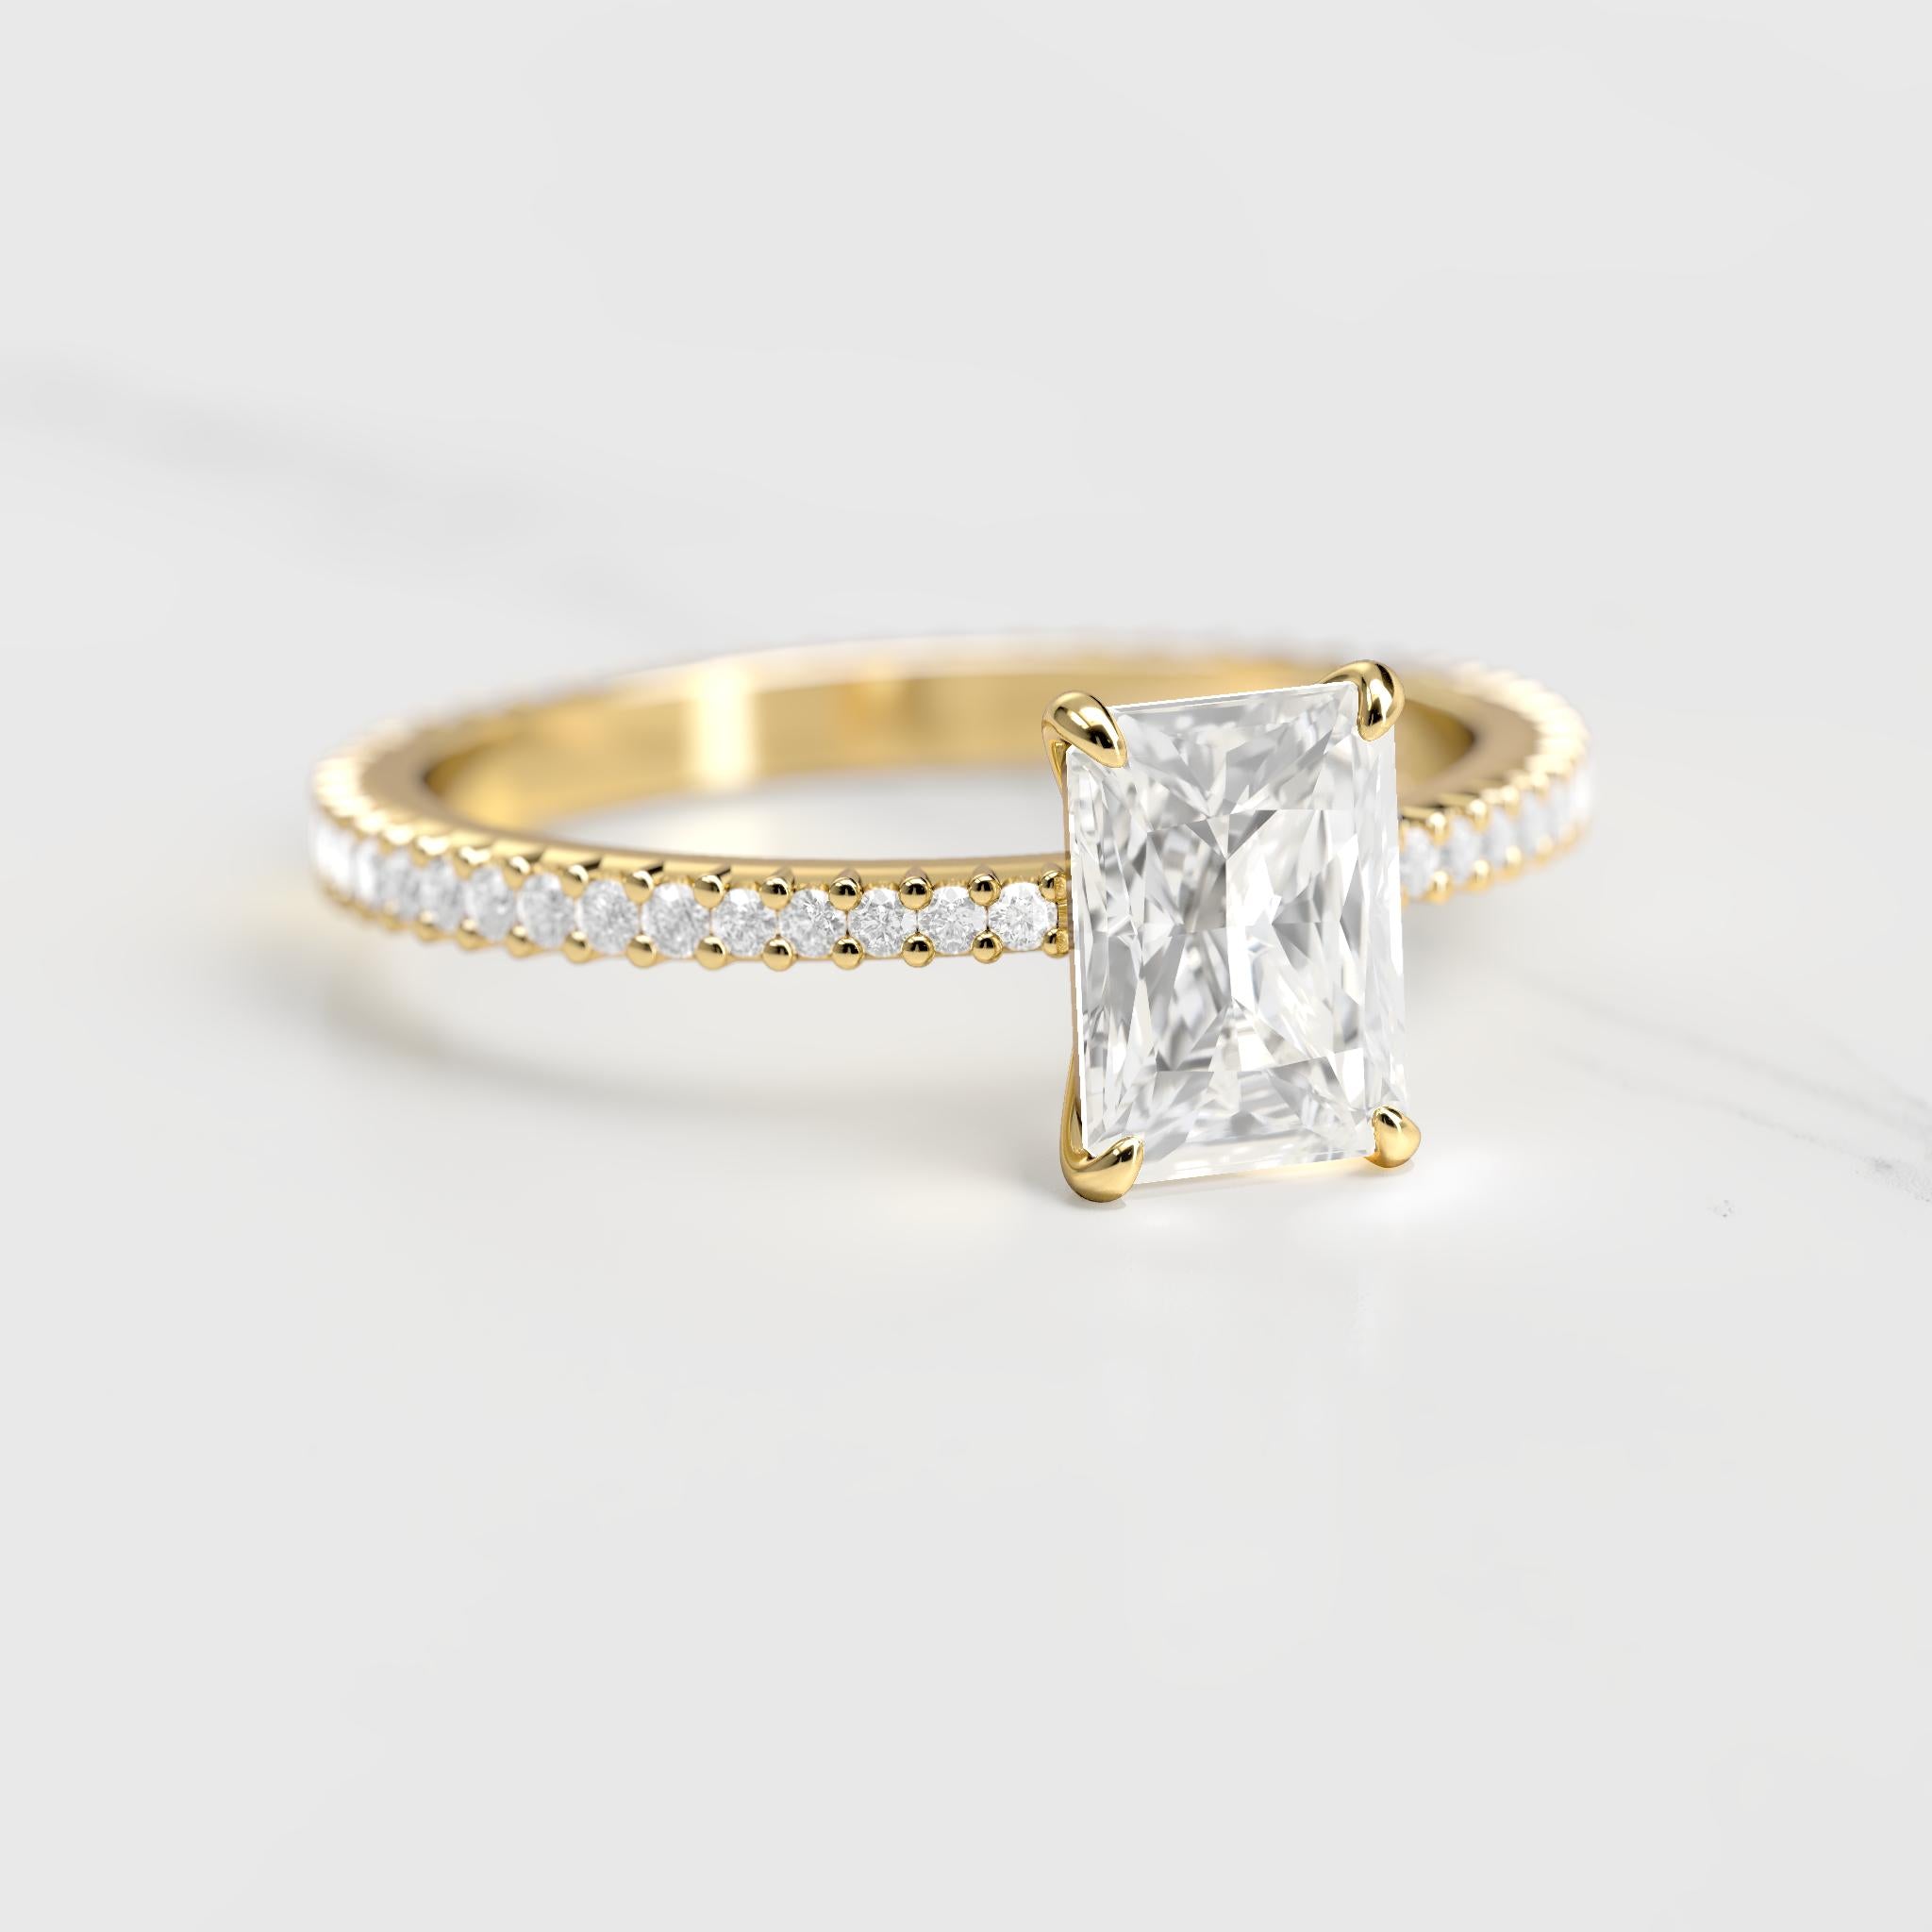 RADIANT FULL PAVE TAPERED DIAMOND RING - 18k yellow gold / 1.25ct / natural diamond